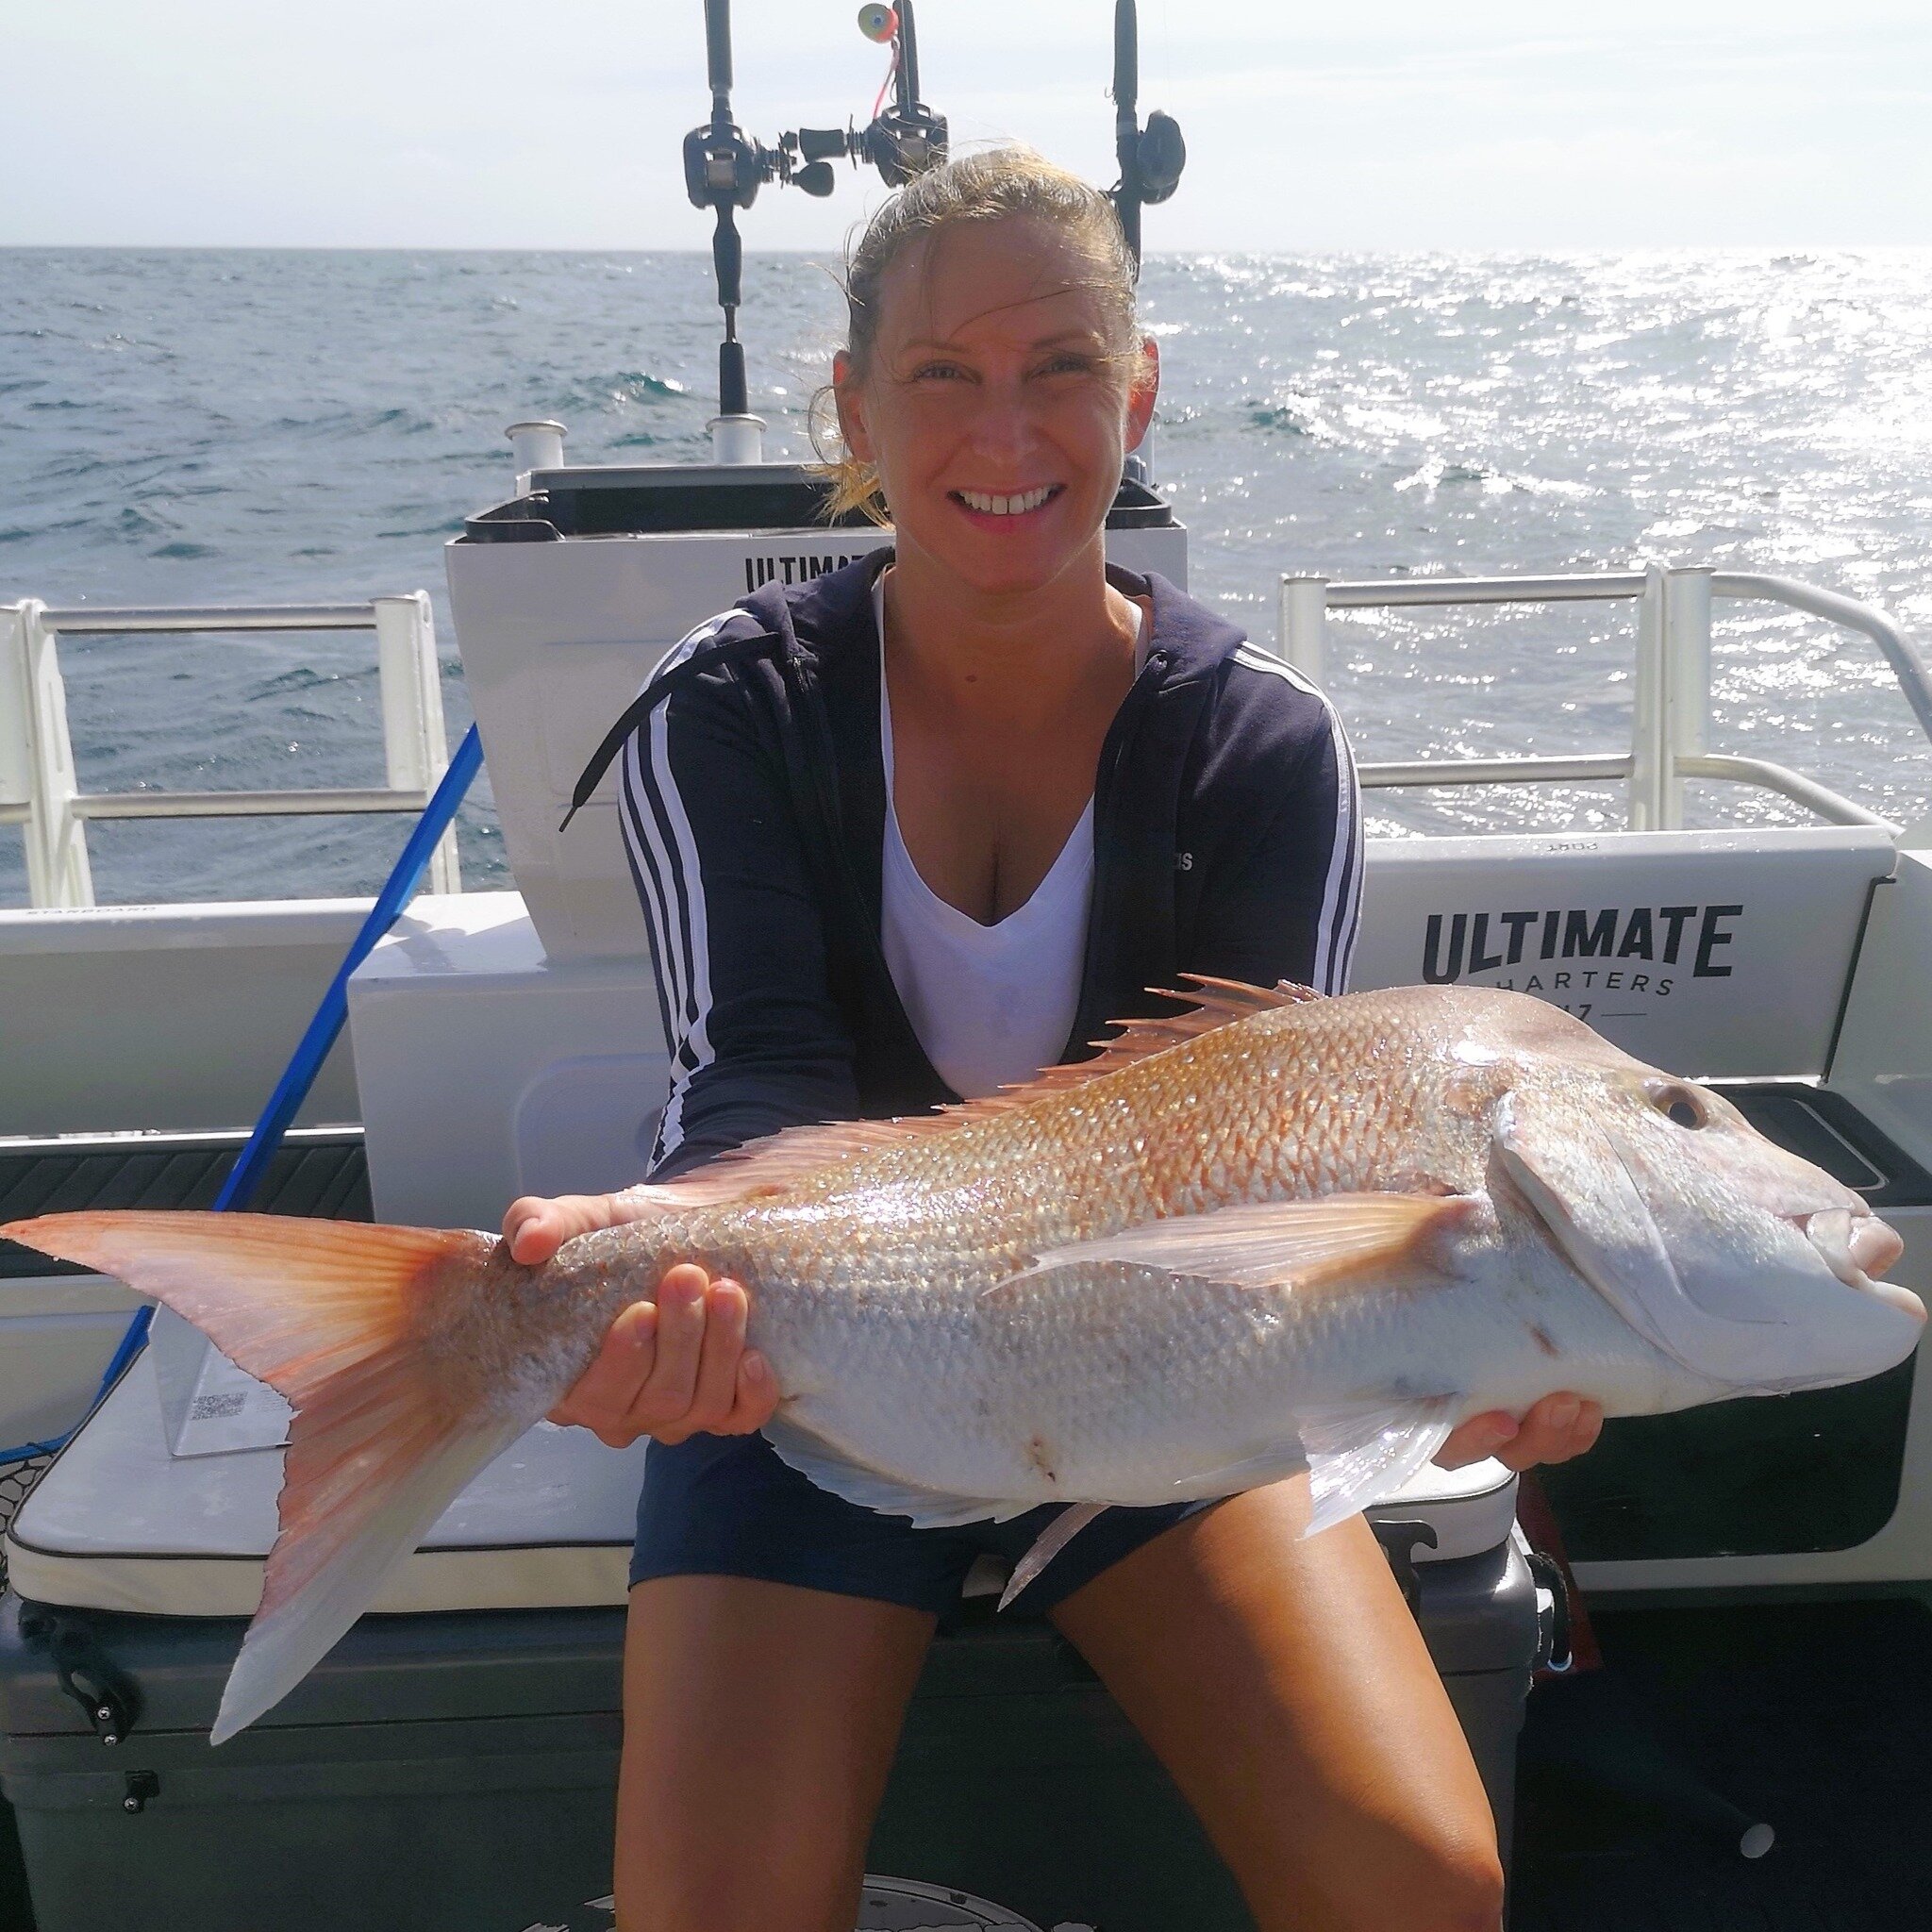 That's worth a trip over from Aus for... 😃

@okuma_nz 

#ultimatehchartersnewzealand #ultimatecharters #fishingcharters #lurefishing #snapper